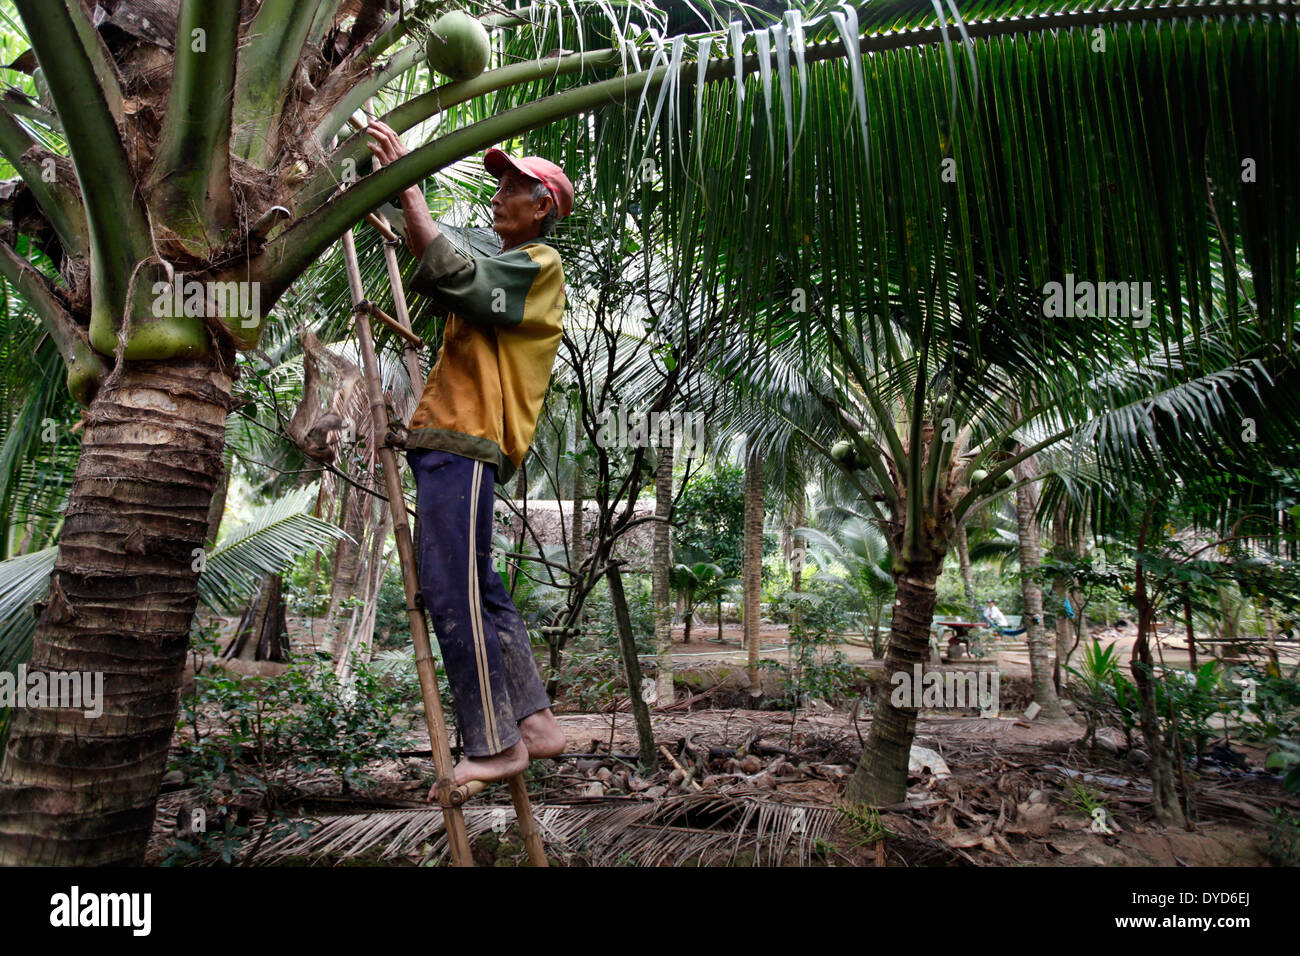 A man cleans up a coconut tree in Ben Tre province, Vietnam Stock Photo